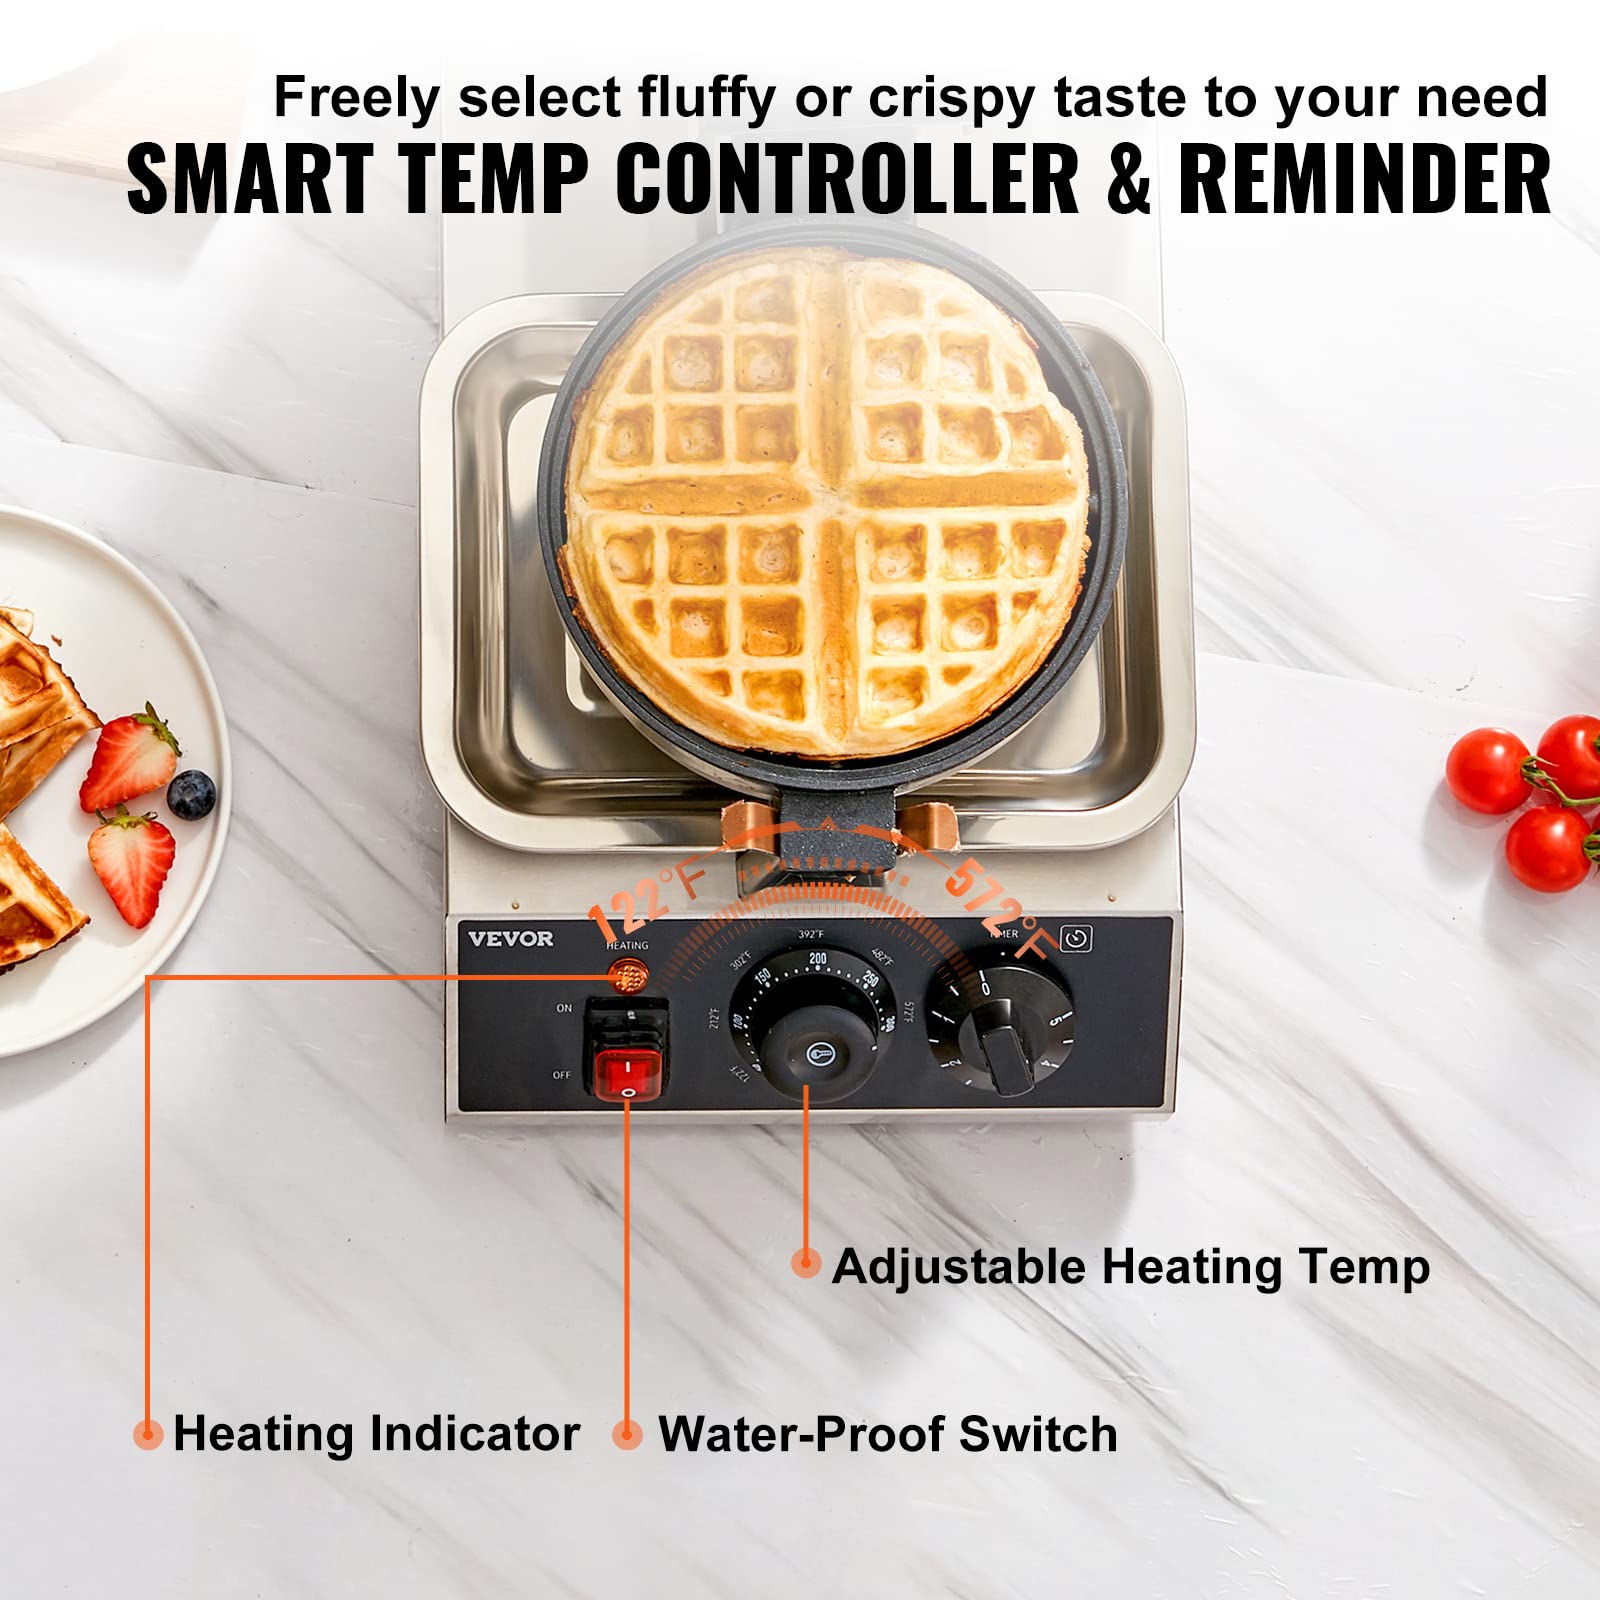 VEVOR Commercial Waffle Maker, 1300W Round Waffle Iron, Non-Stick Rotatable Waffle Baker Machine With 122-572℉ Temp Range and Time Control, Teflon-Coated Baking Pan Stainless Steel Body 120V